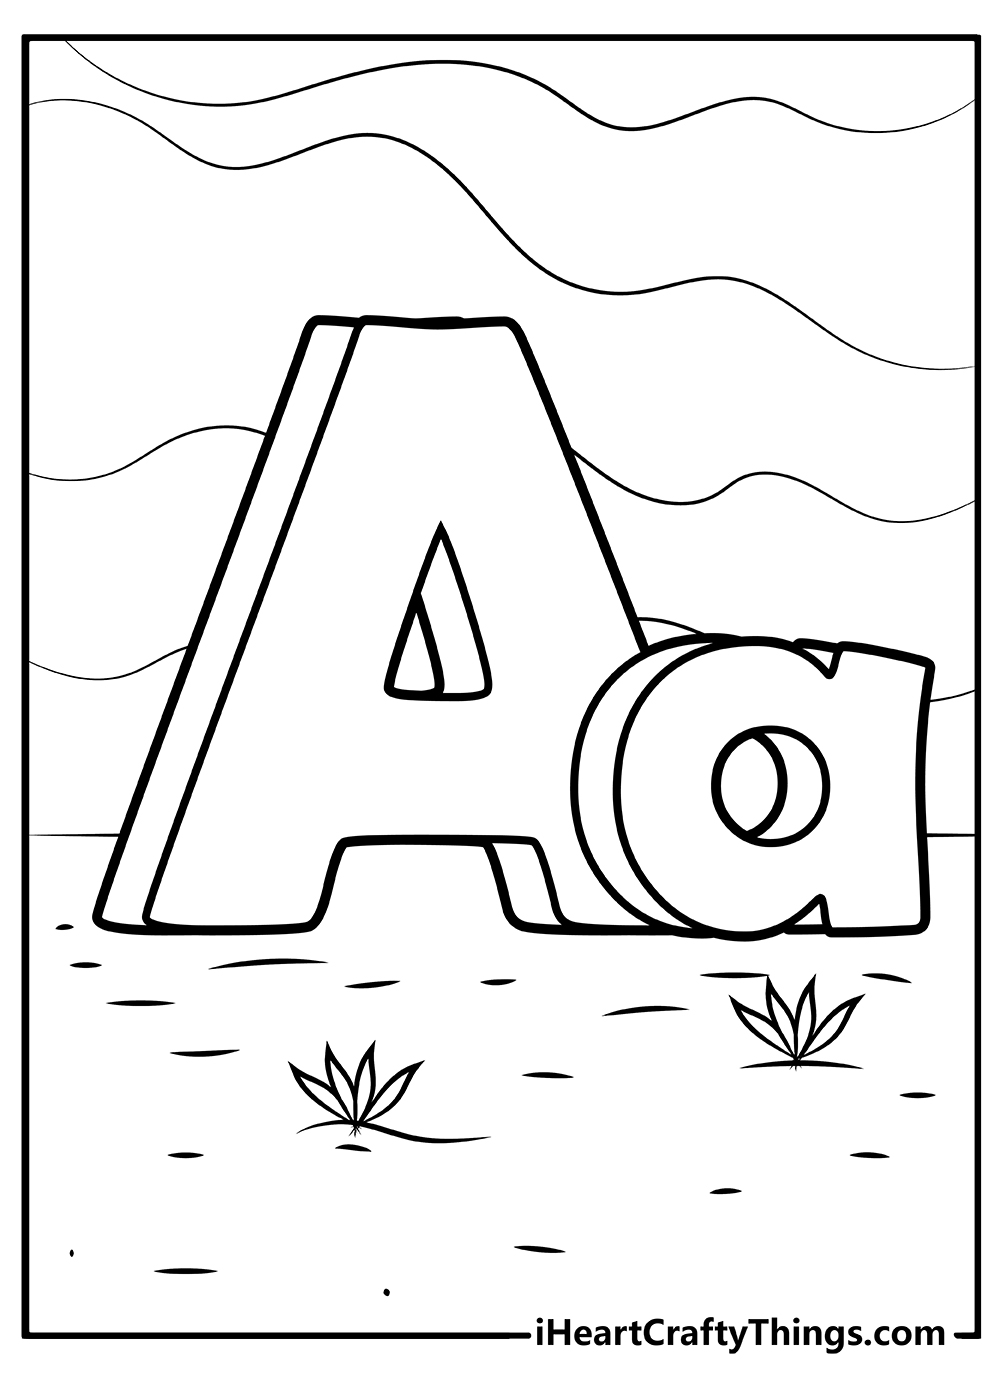 Alphabet Coloring Page A Z Coloring Page Pedia Kinder